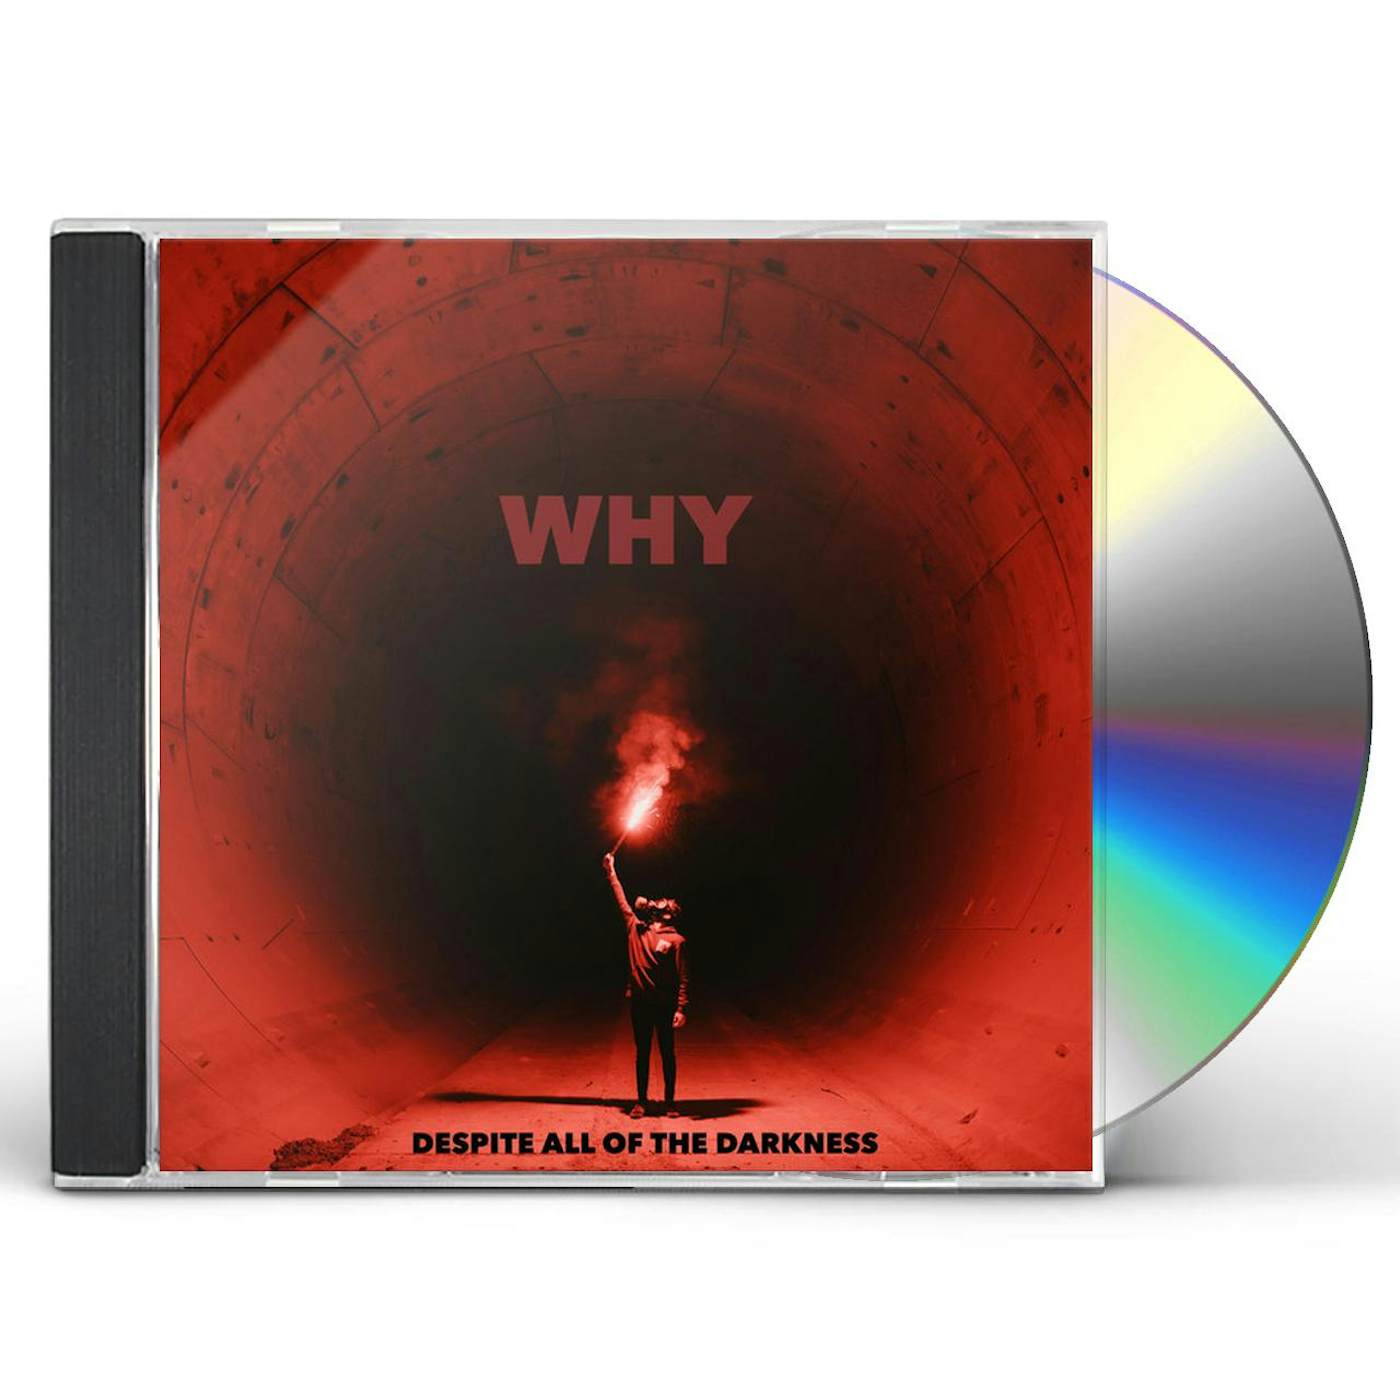 Why DESPITE ALL OF THE DARKNESS CD